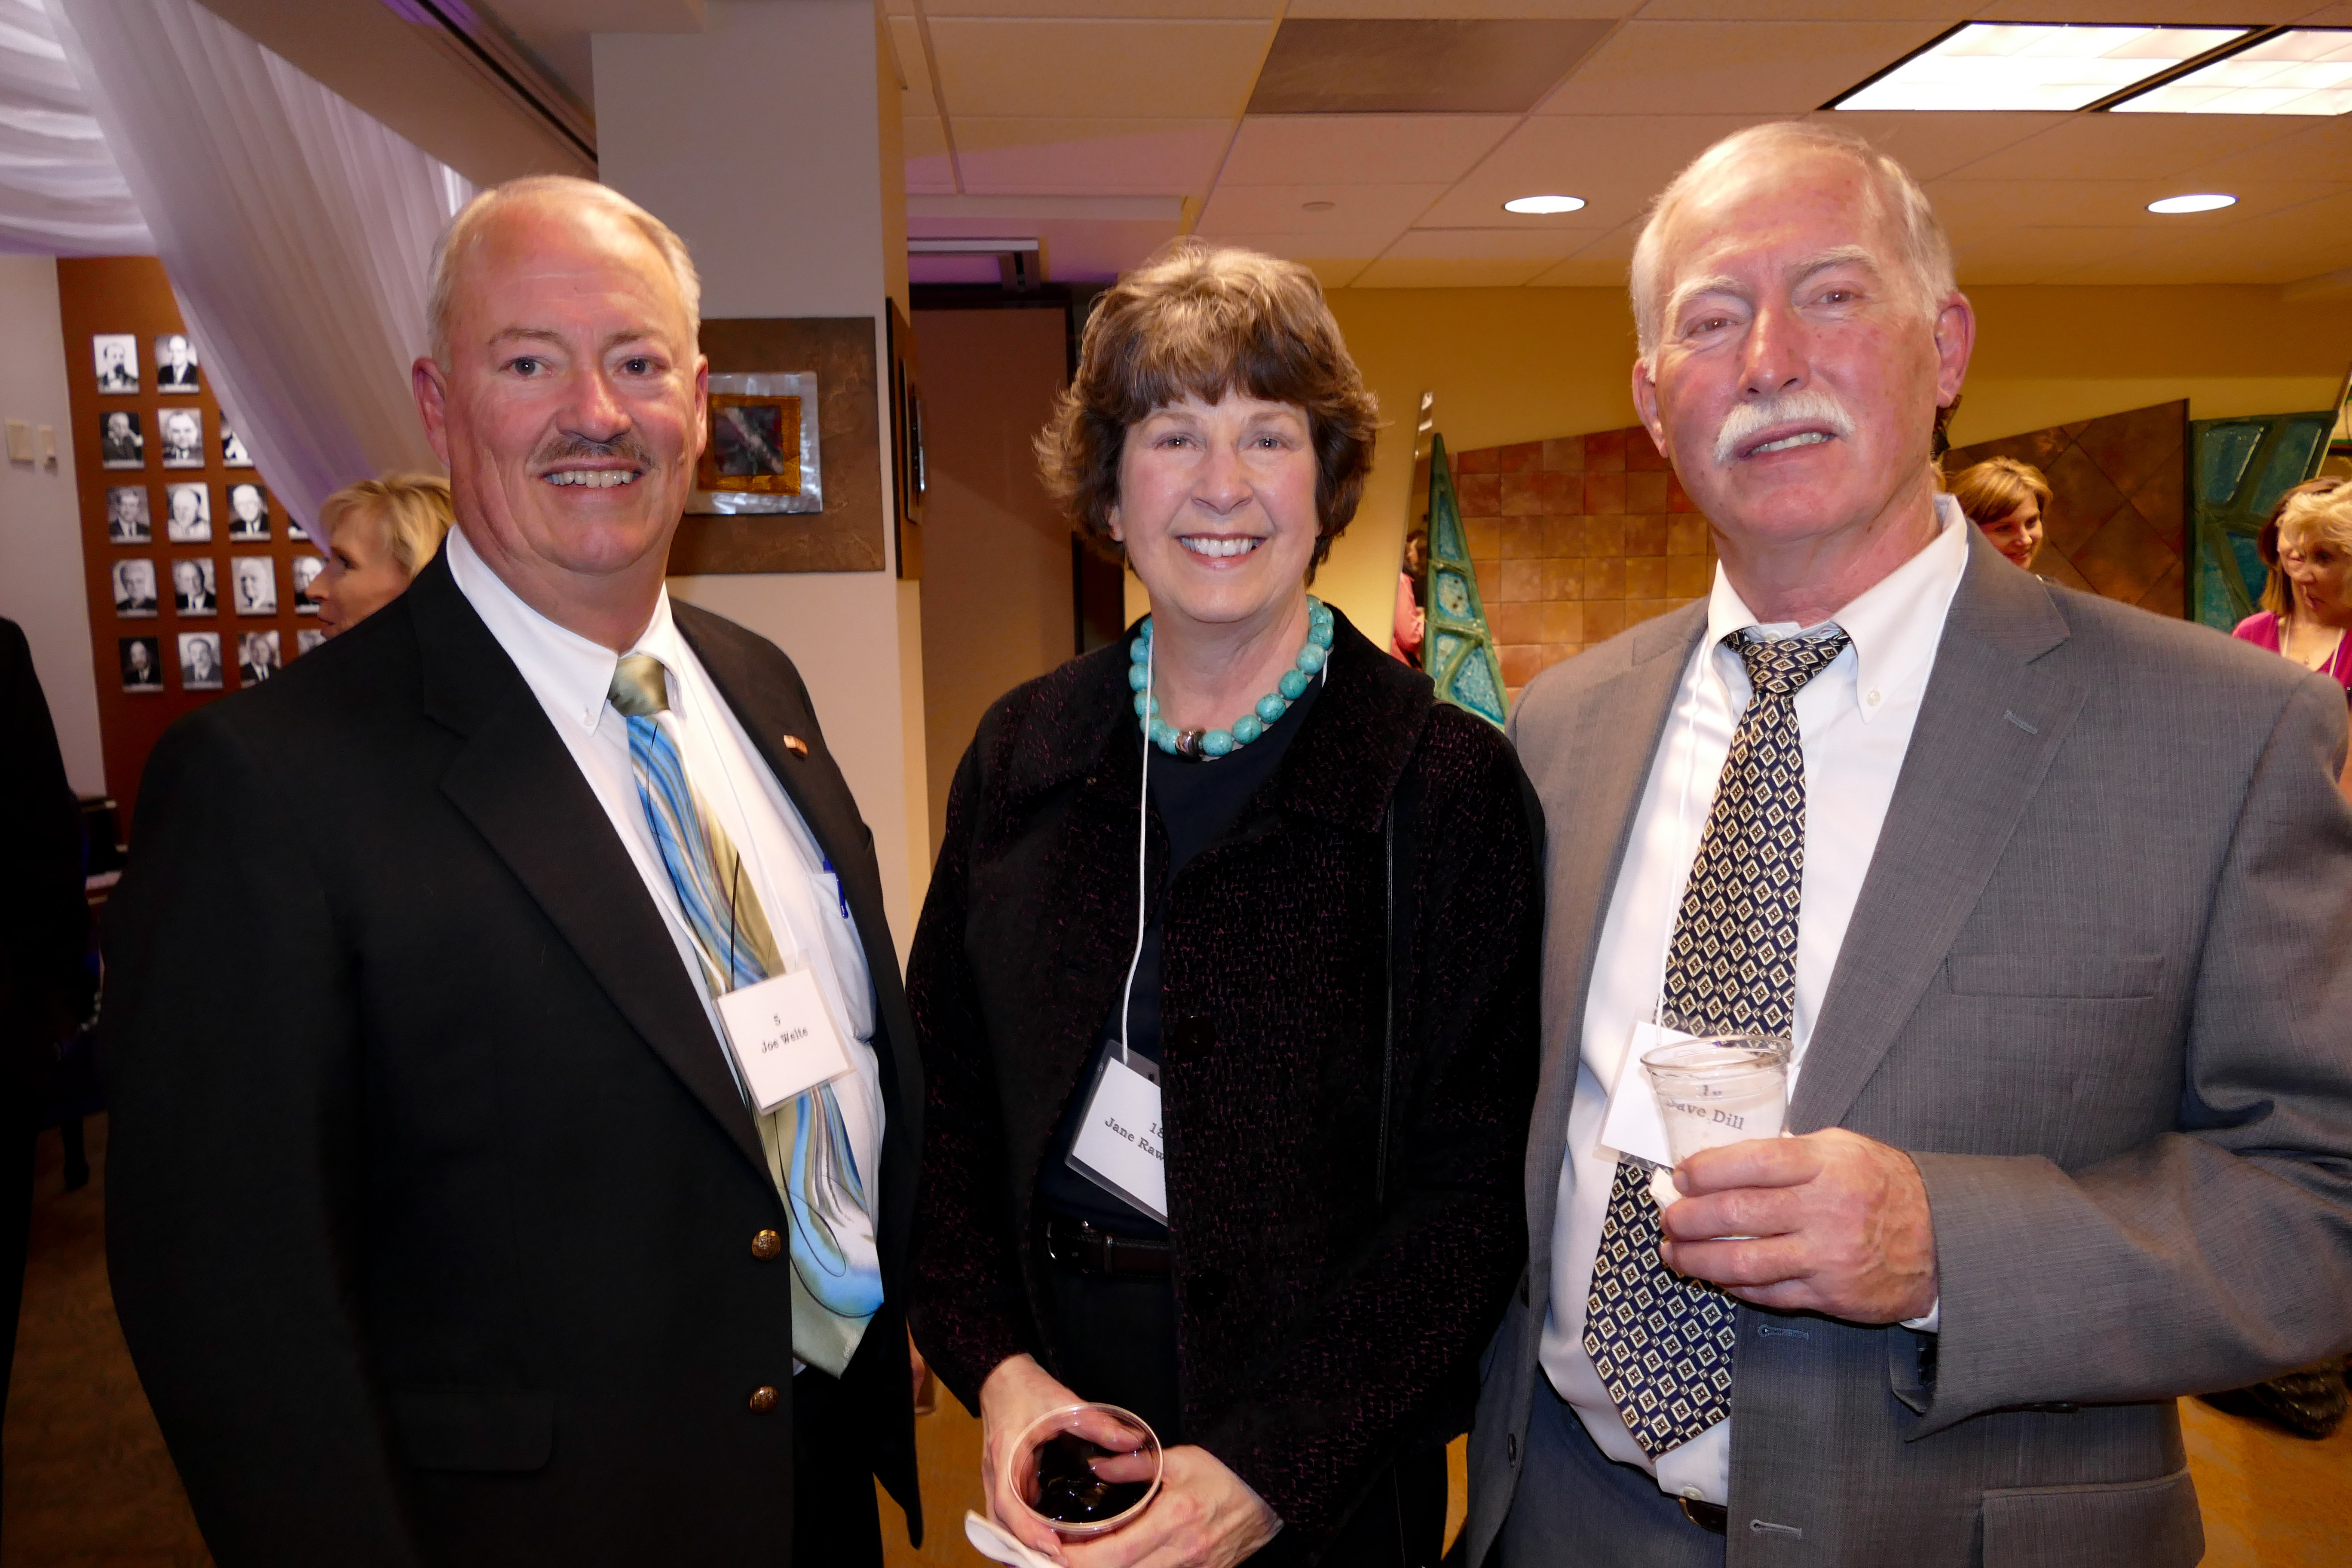 Joe Welte, left, Jane Rawlings and her husband Dave Dill